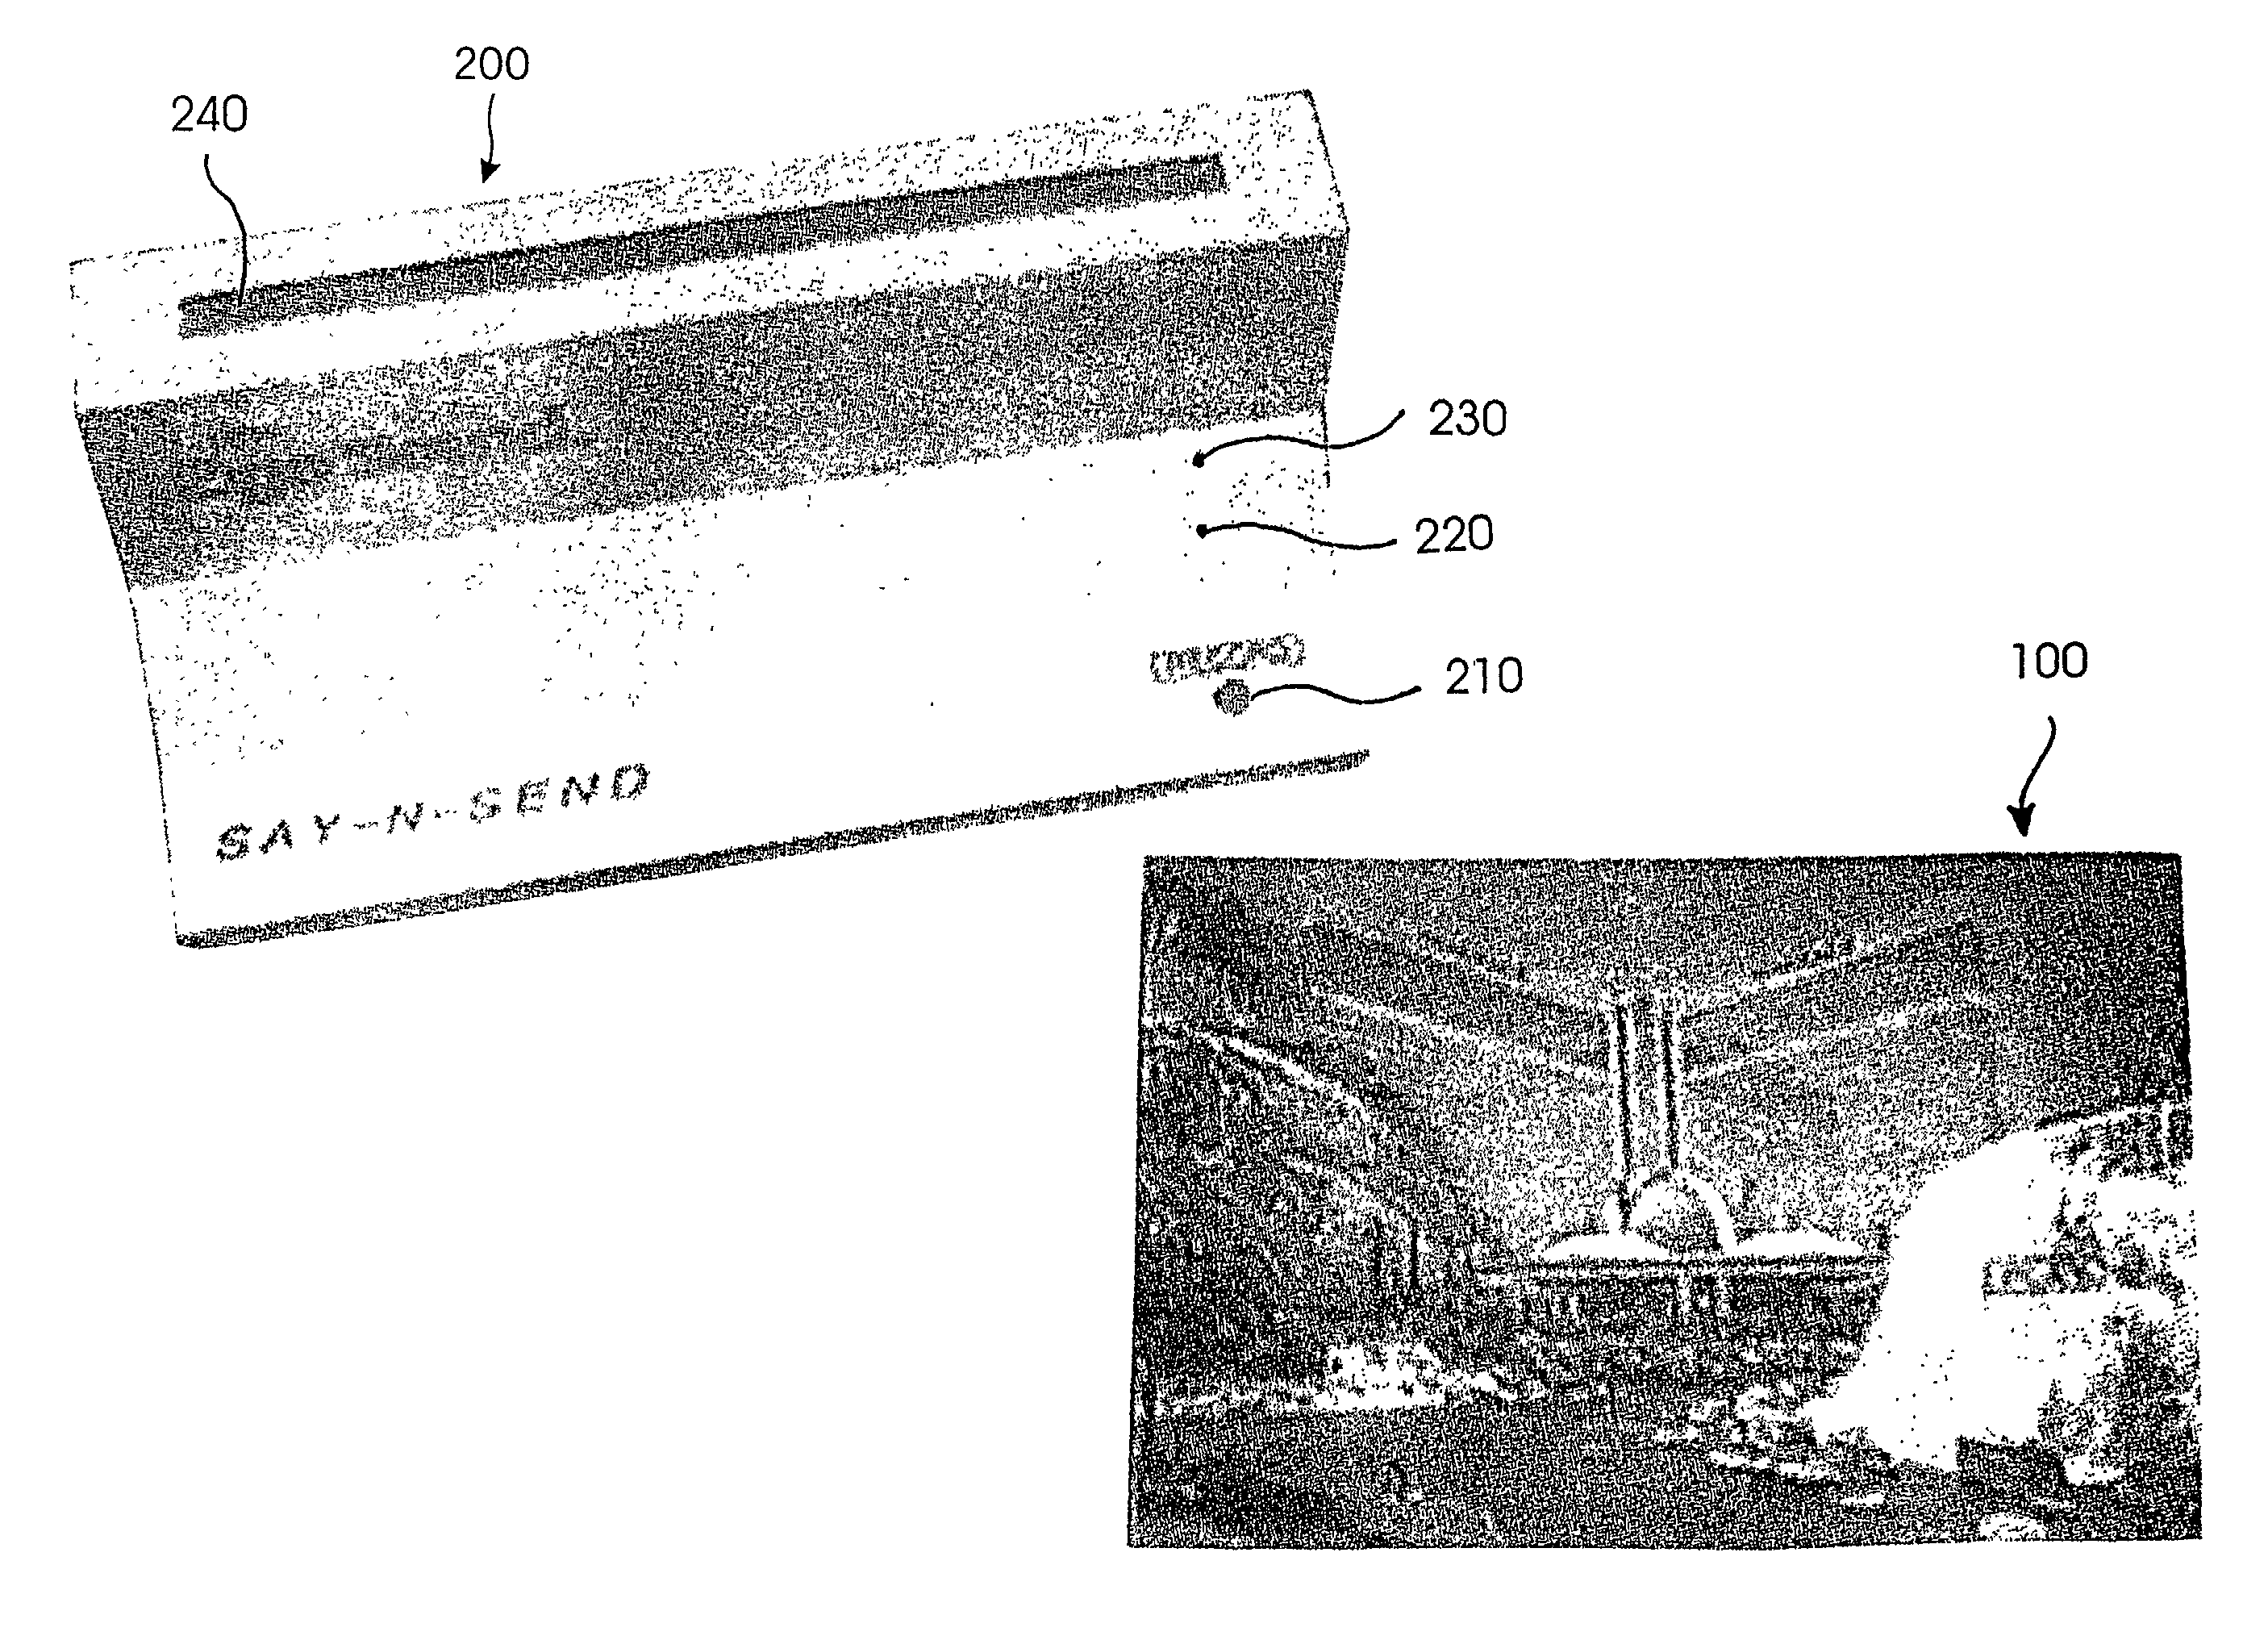 Technique and an apparatus for producing postcards having an audio message for playback by recipient